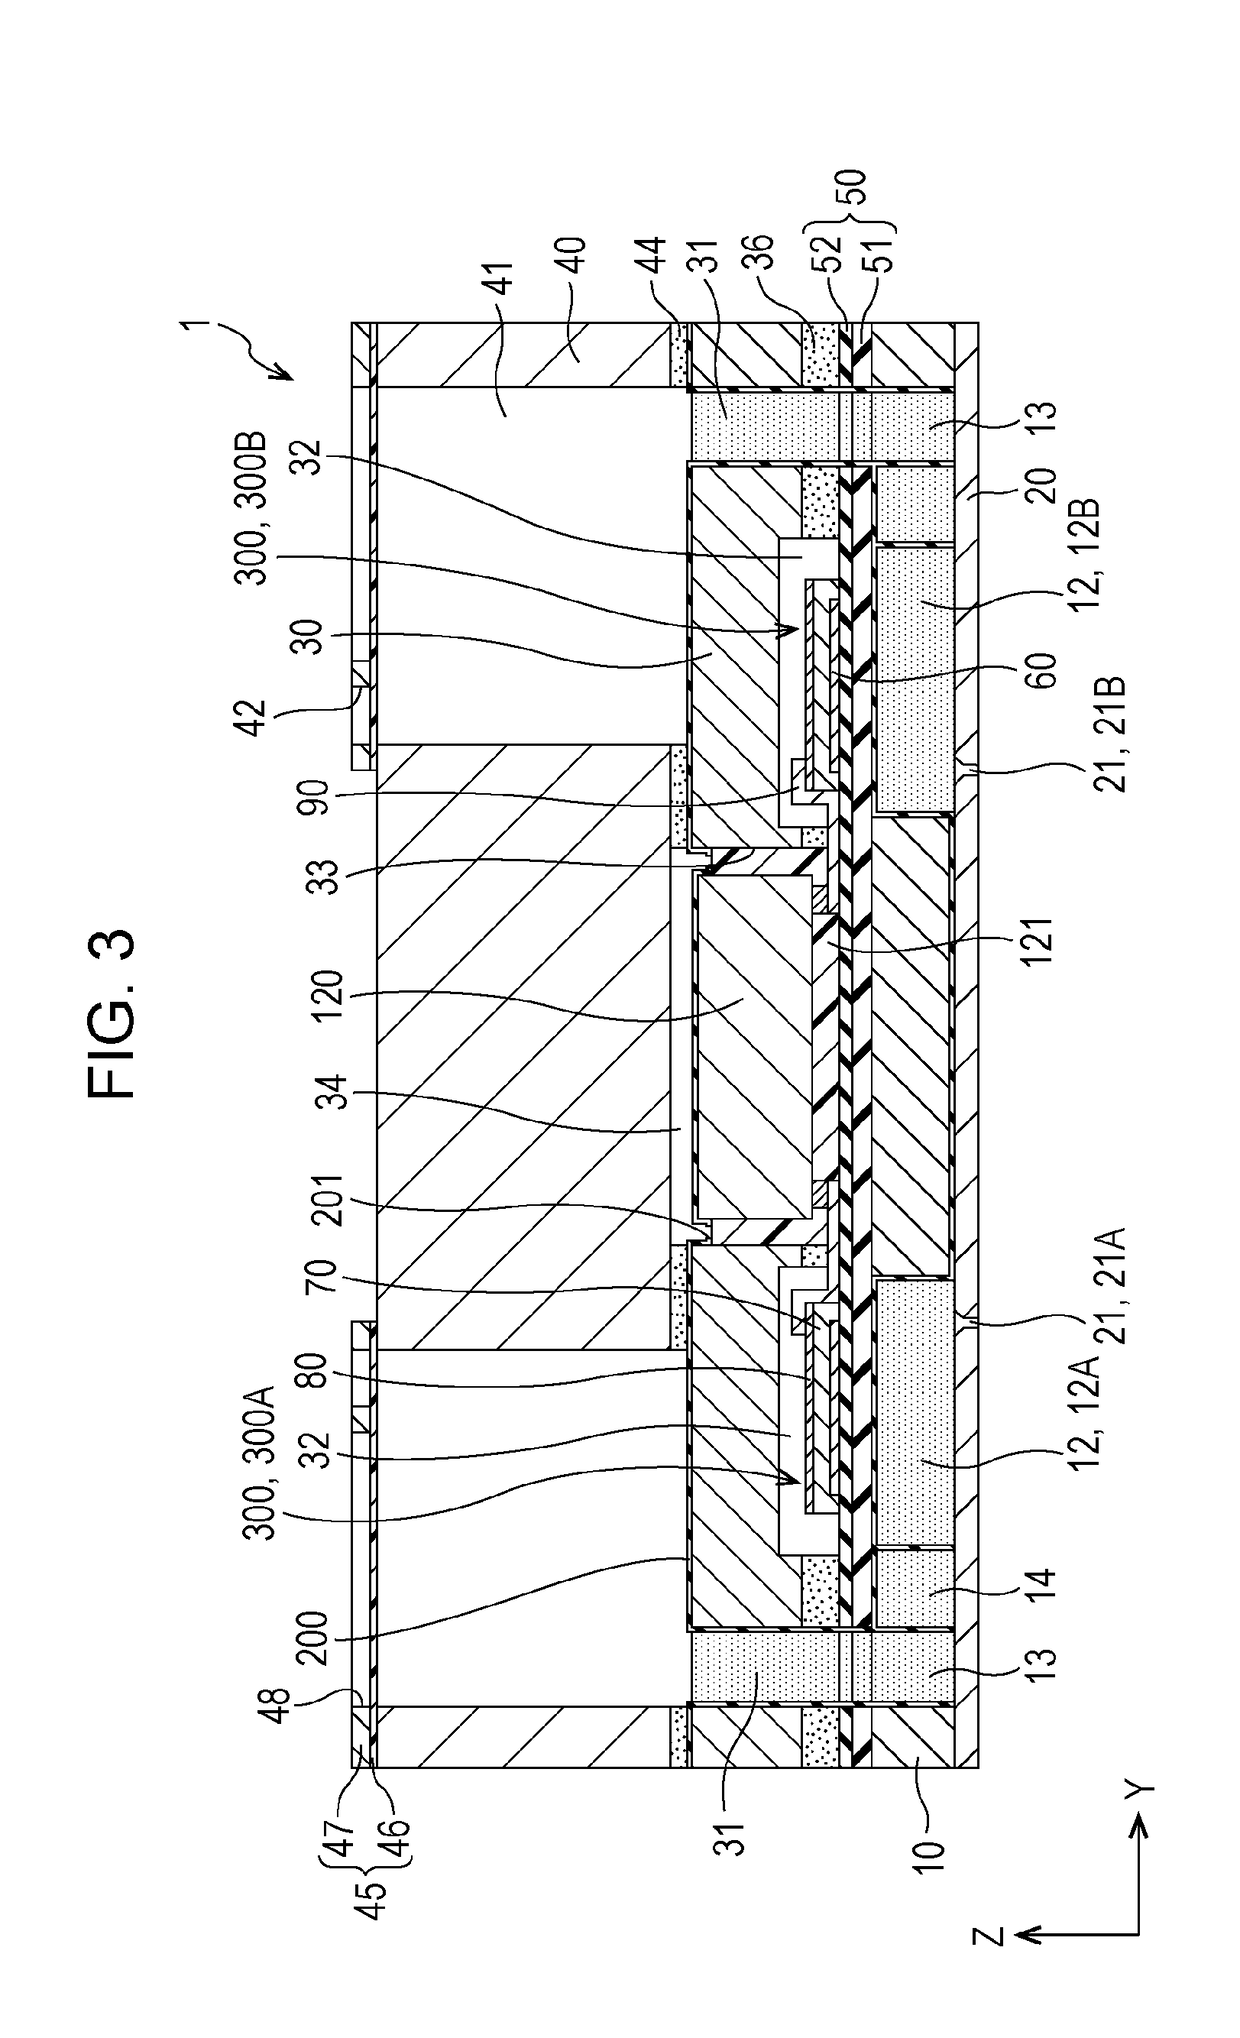 Liquid ejecting head, liquid ejecting apparatus, and piezoelectric device